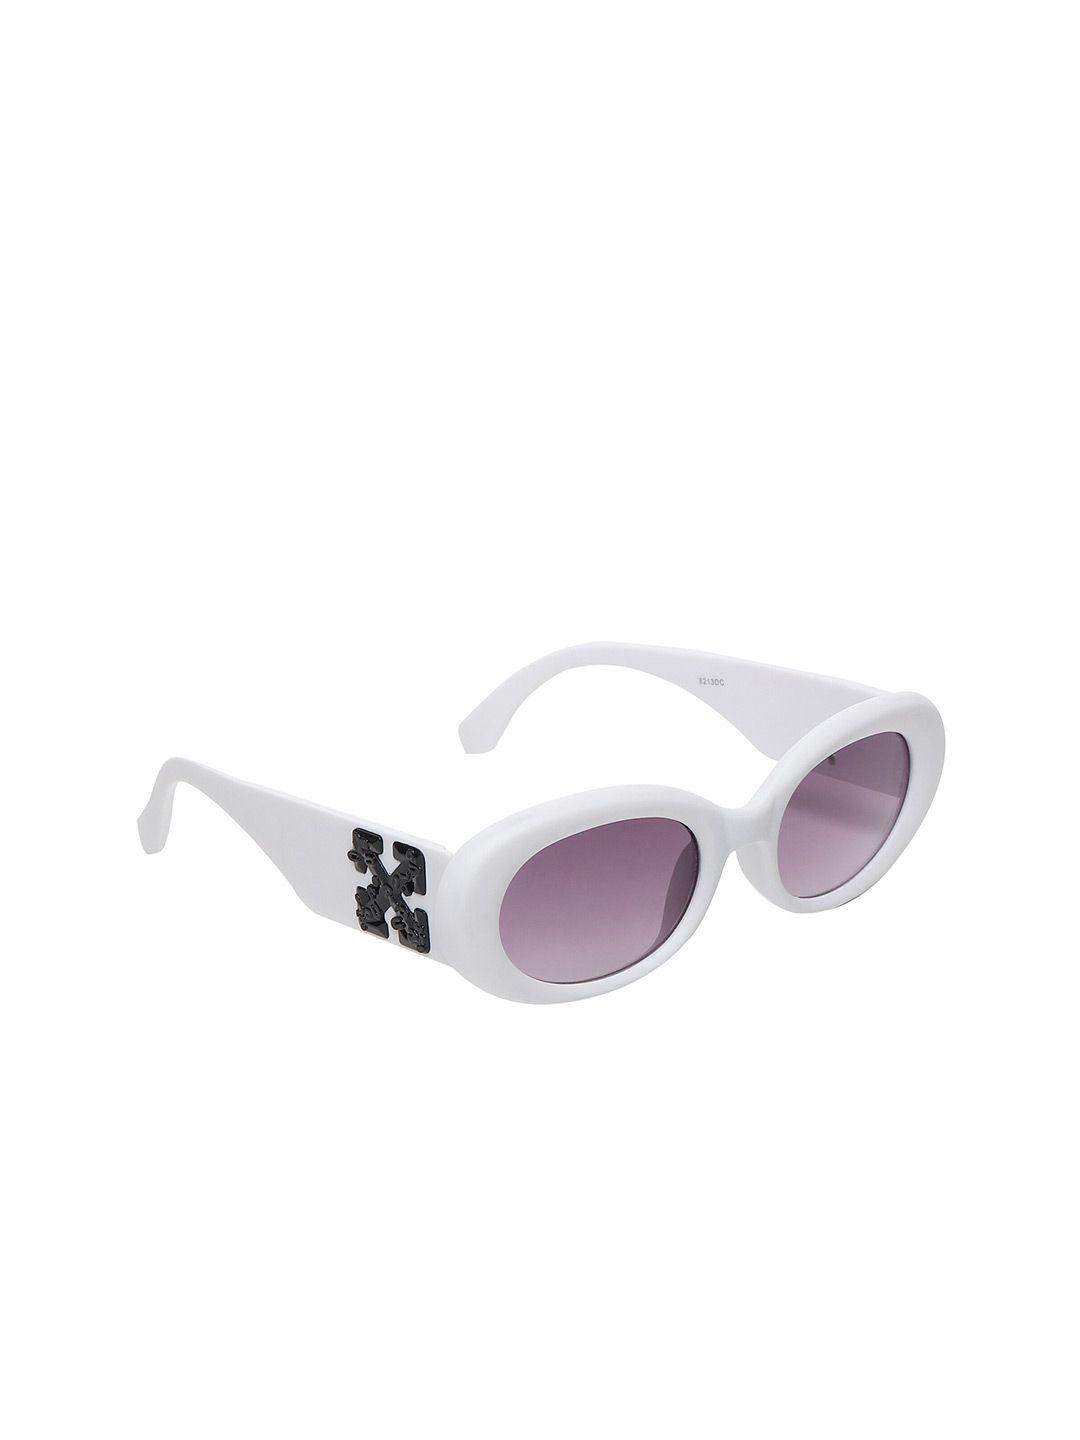 swiss design unisex lens & oval sunglasses with uv protected lens